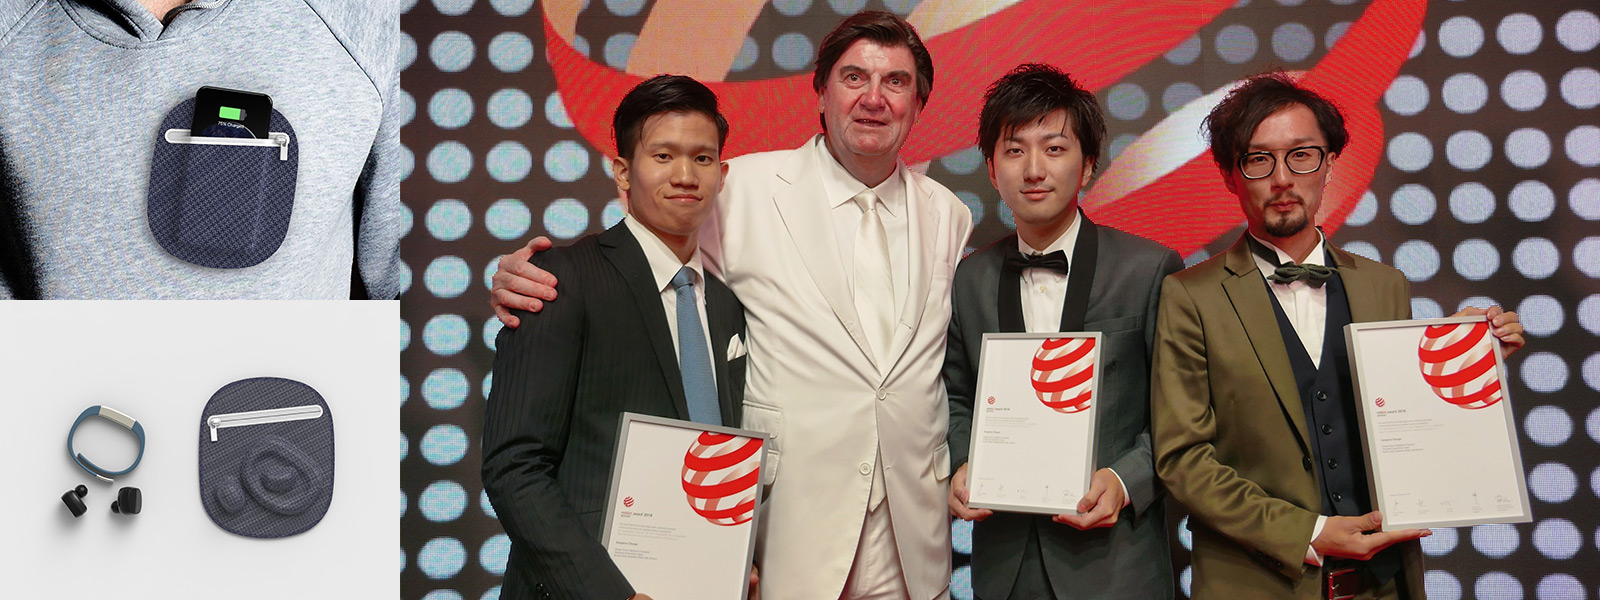 Photo: Kangaroo Charger and the award ceremony for the Red Dot Design Award